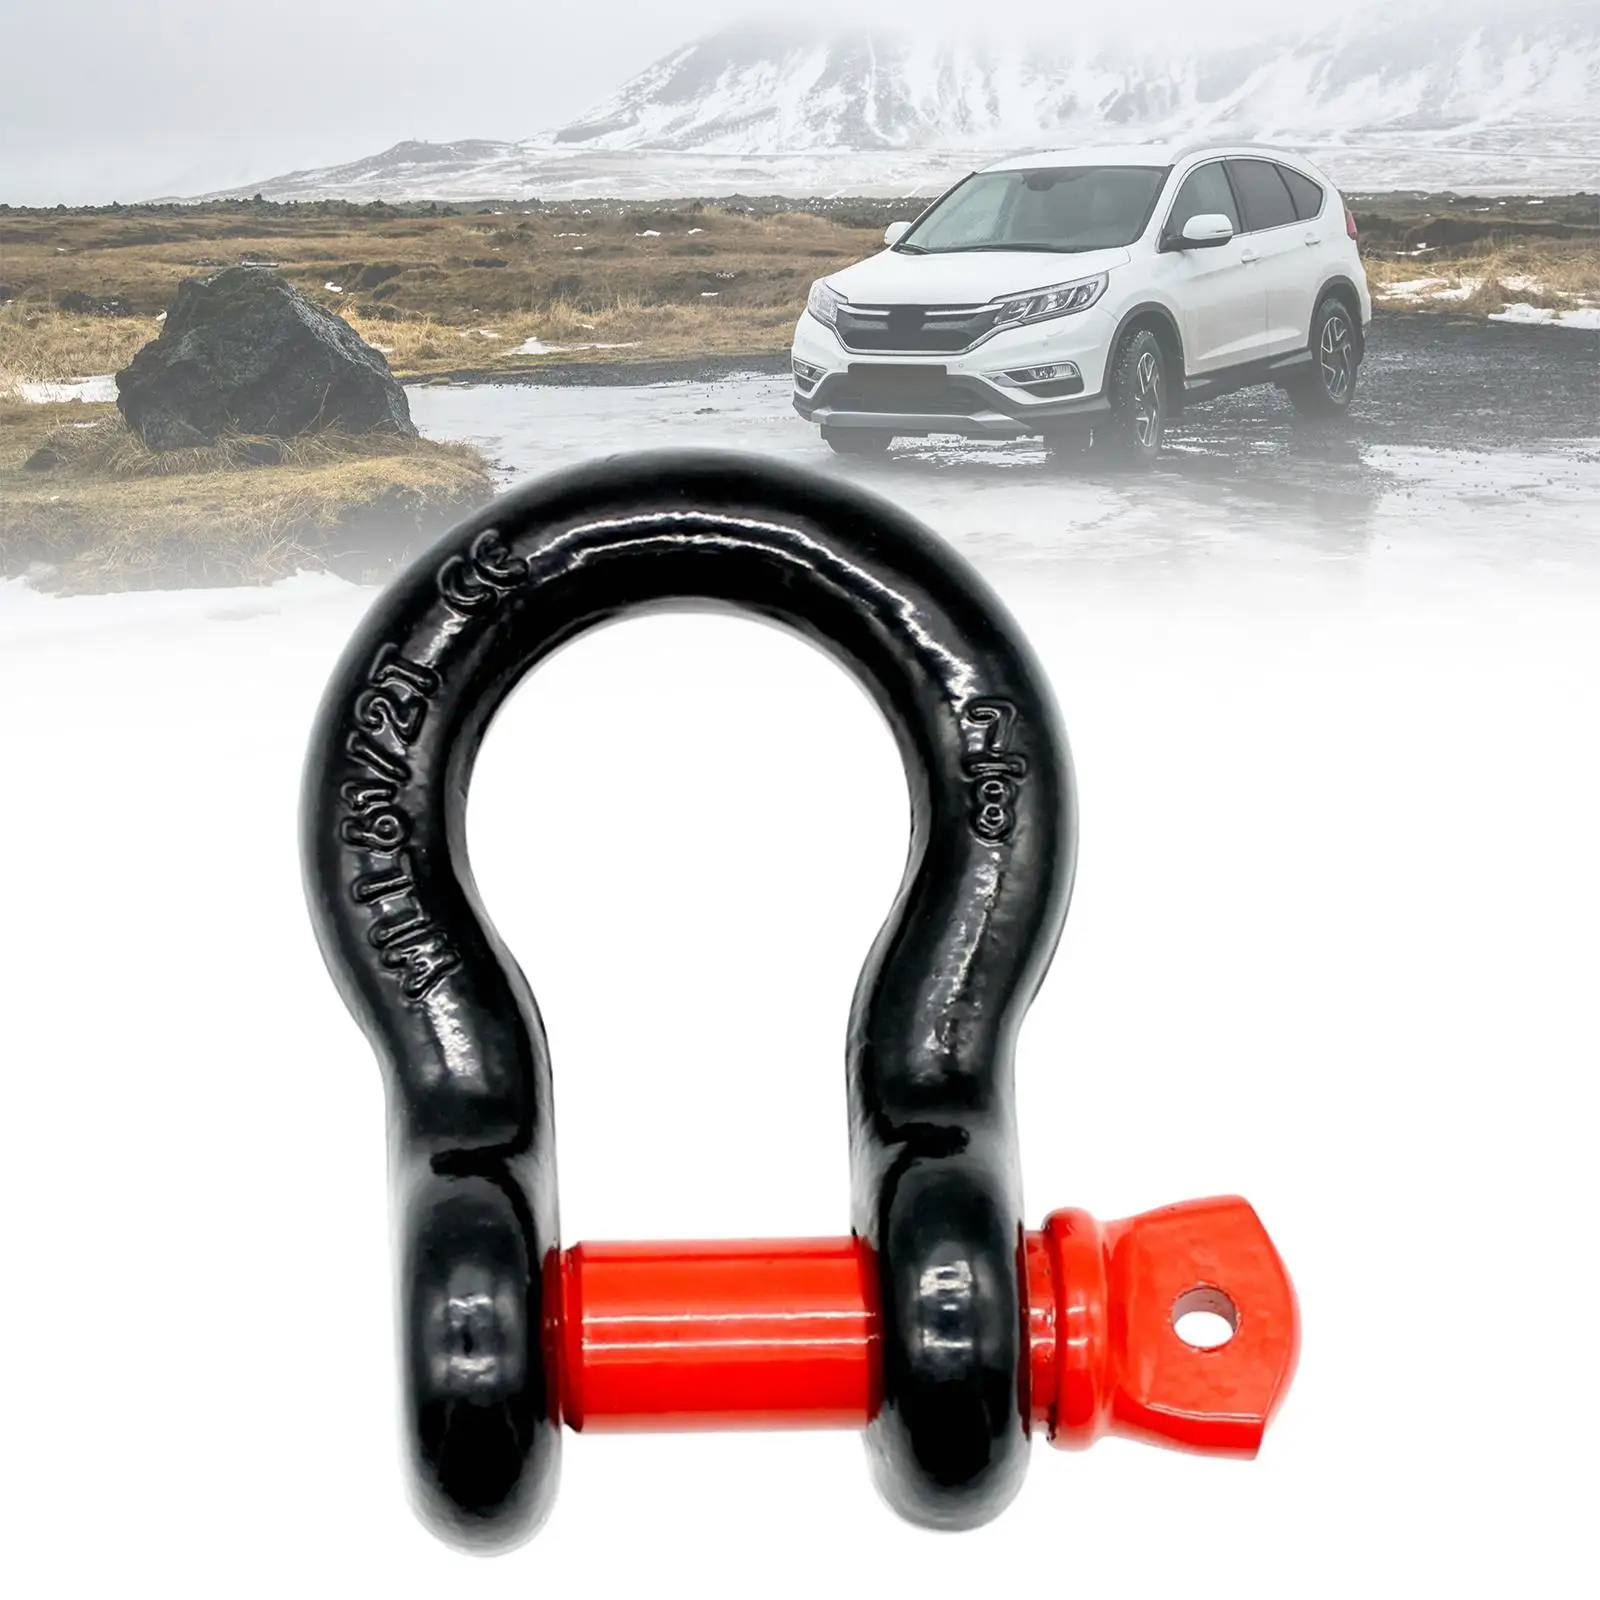 Car Hook Sturdy Heavy Duty D Ring Shackle for Winch Accessories Vehicle Recovery Trailer Hitch Vehicle Wear Resistant